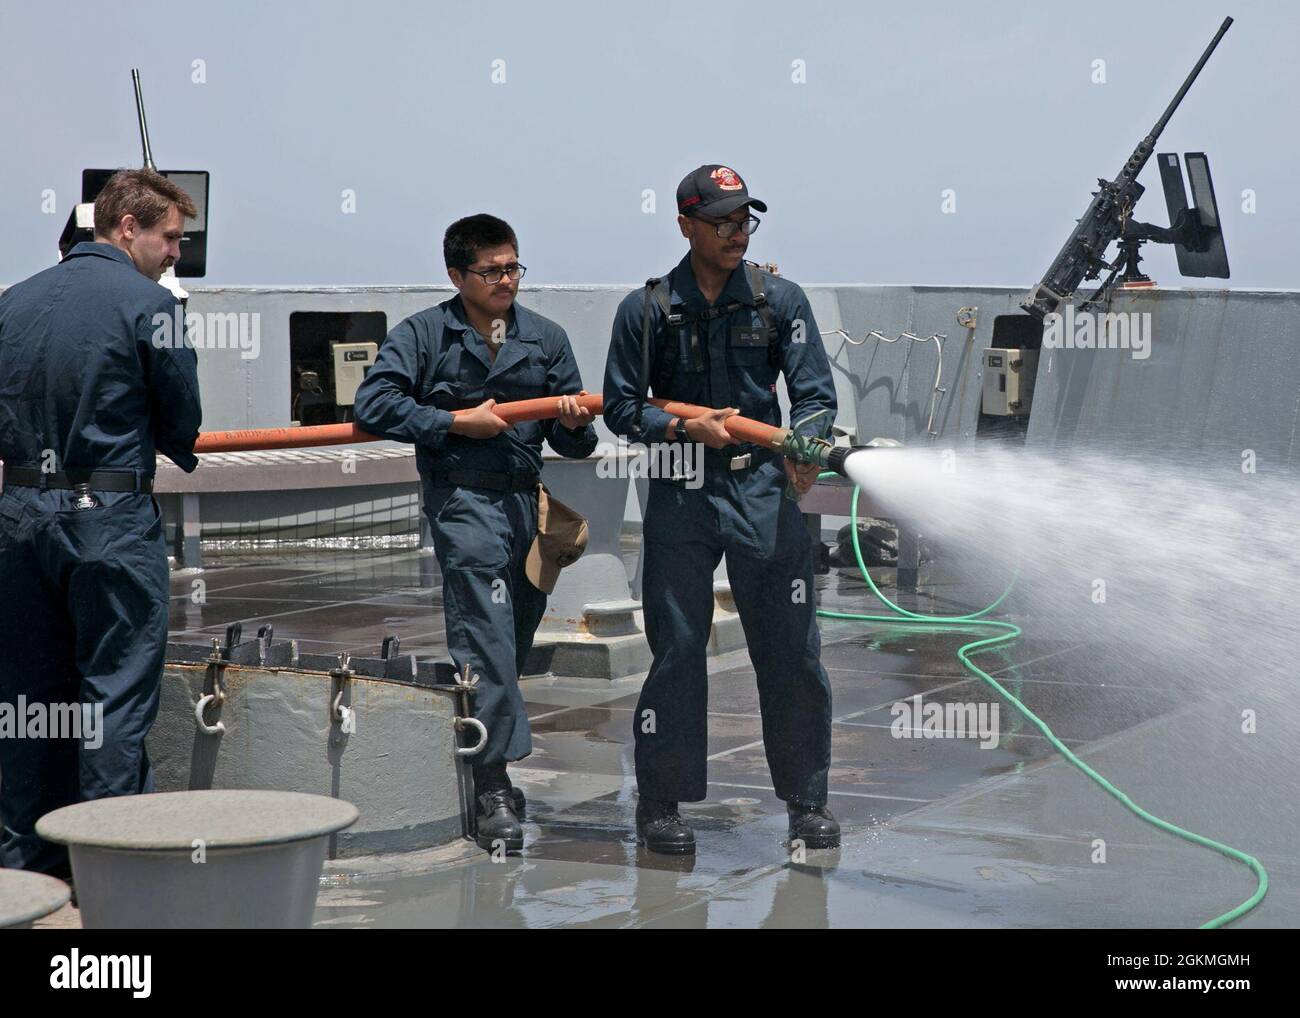 210526-N-OI940-1020   ATLANTIC OCEAN (May 26, 2021) Sailors assigned to the amphibious transport dock ship USS San Antonio (LPD 17), wash the deck with a fire hose on the ship's fo'c's'le, May 26, 2021. San Antonio is operating in the Atlantic Ocean with Amphibious Squadron 4 and the 24th Marine Expeditionary Unit (24th MEU) as part of the Iwo Jima Amphibious Ready Group. Stock Photo